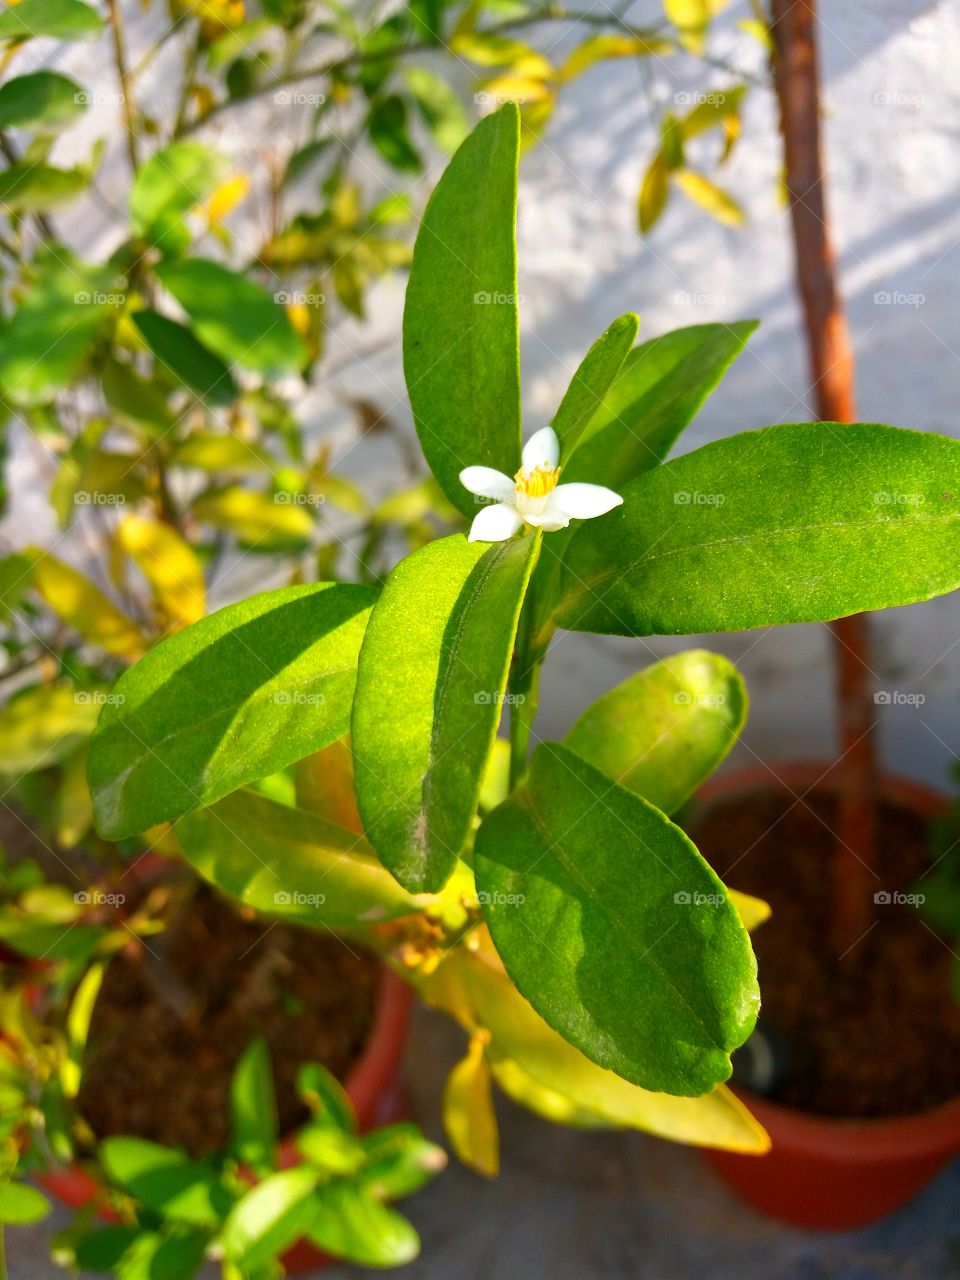 There is a plant of Lemon. 
And there beginning Flower...
is Grwon ....